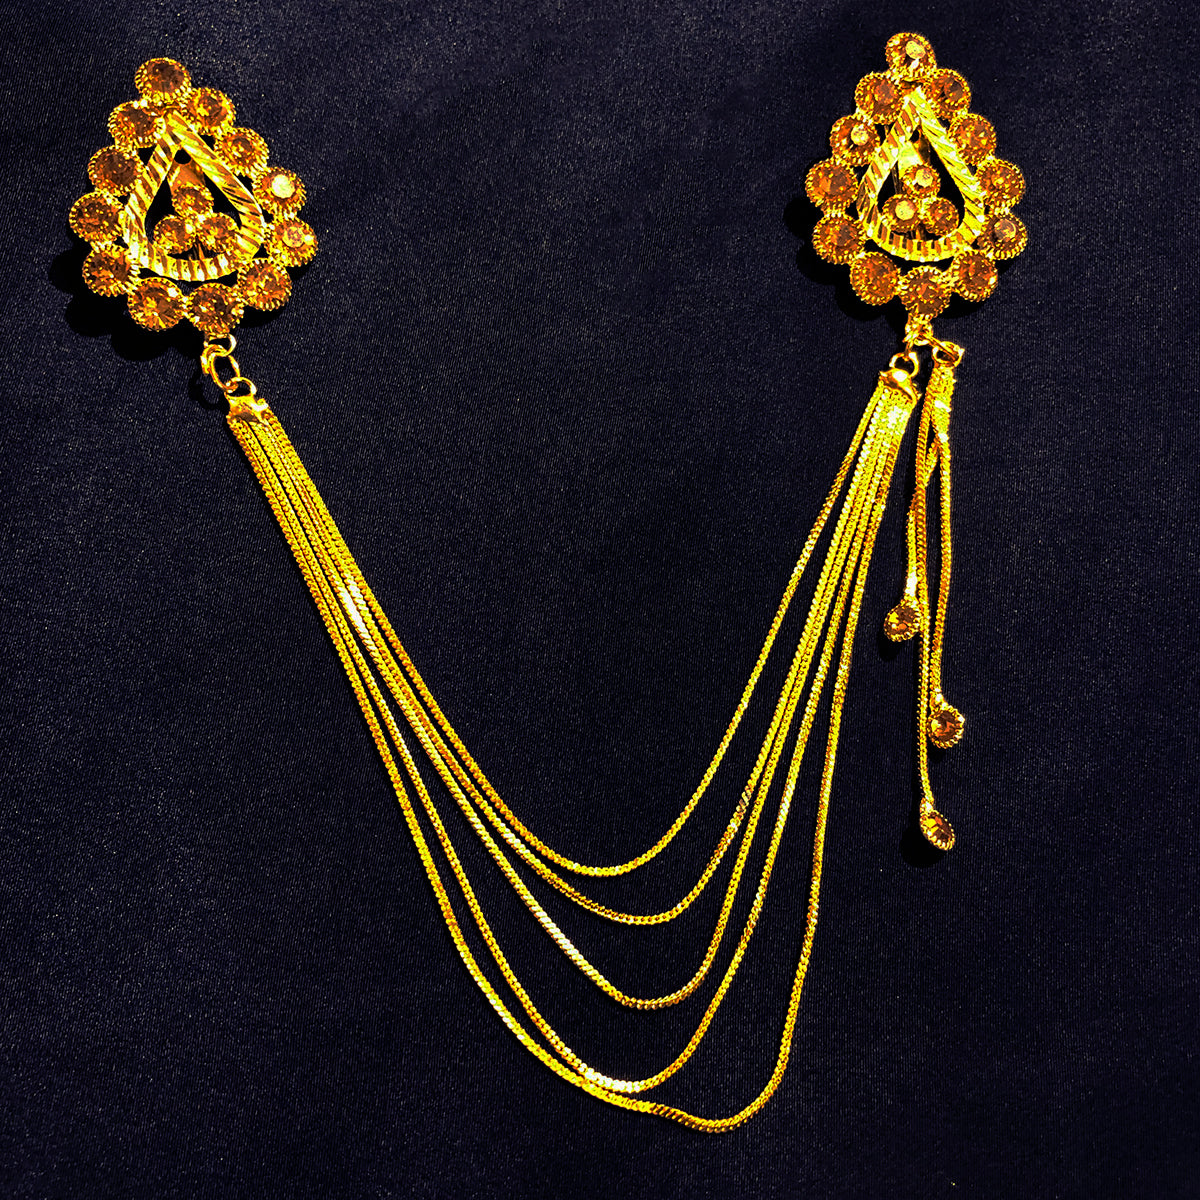 YD Gold Pocket Jewelry - Vintage India NYC